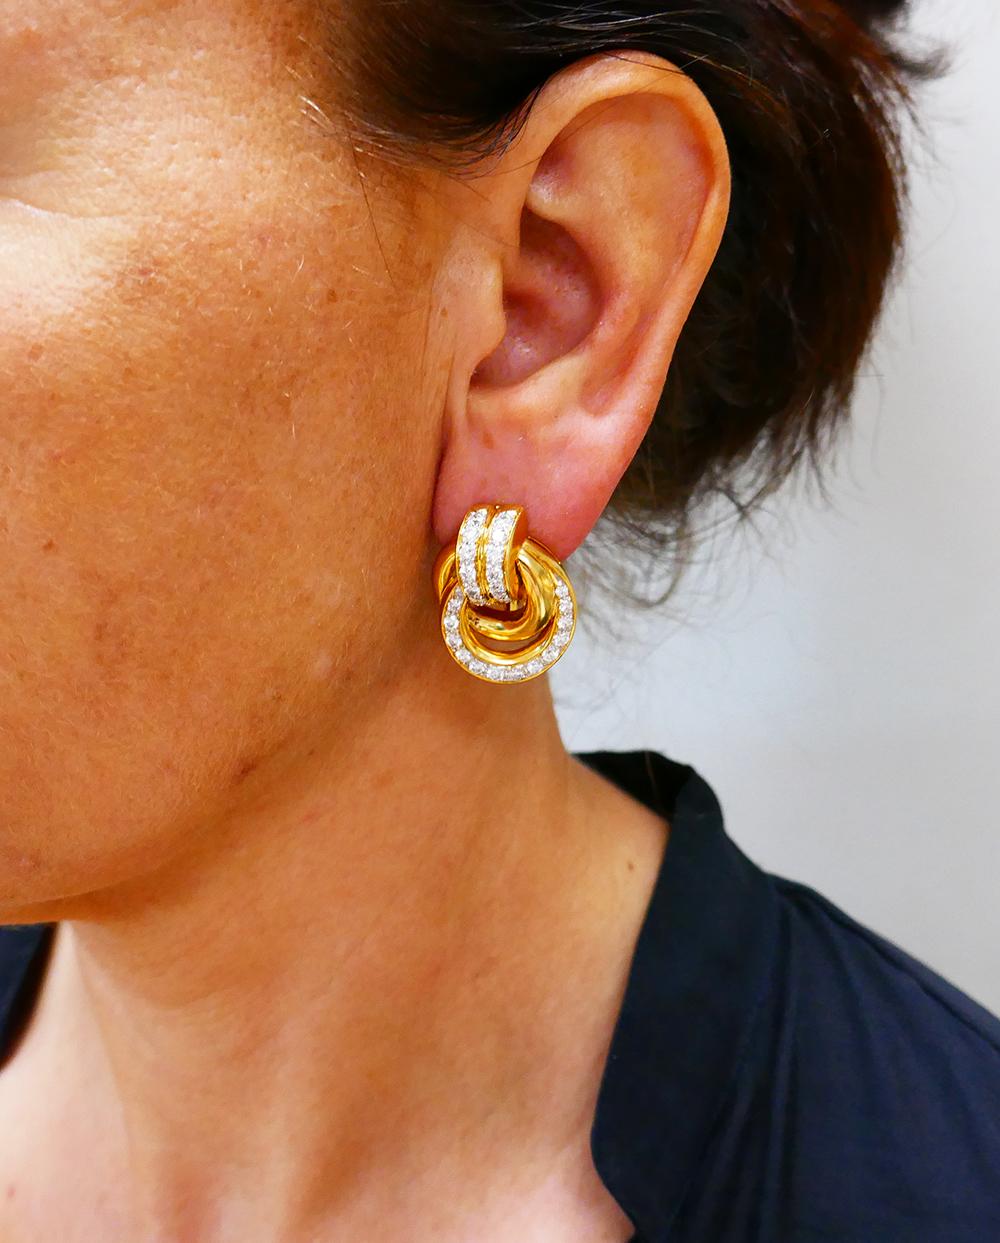 A gorgeous pair of French vintage earrings made of 18 karat gold and diamonds.
The earrings consist of two hoops hanging on a gold loop. One hoop is round, made of polished gold. Another hoop is embellished with round brilliant cut diamonds. The